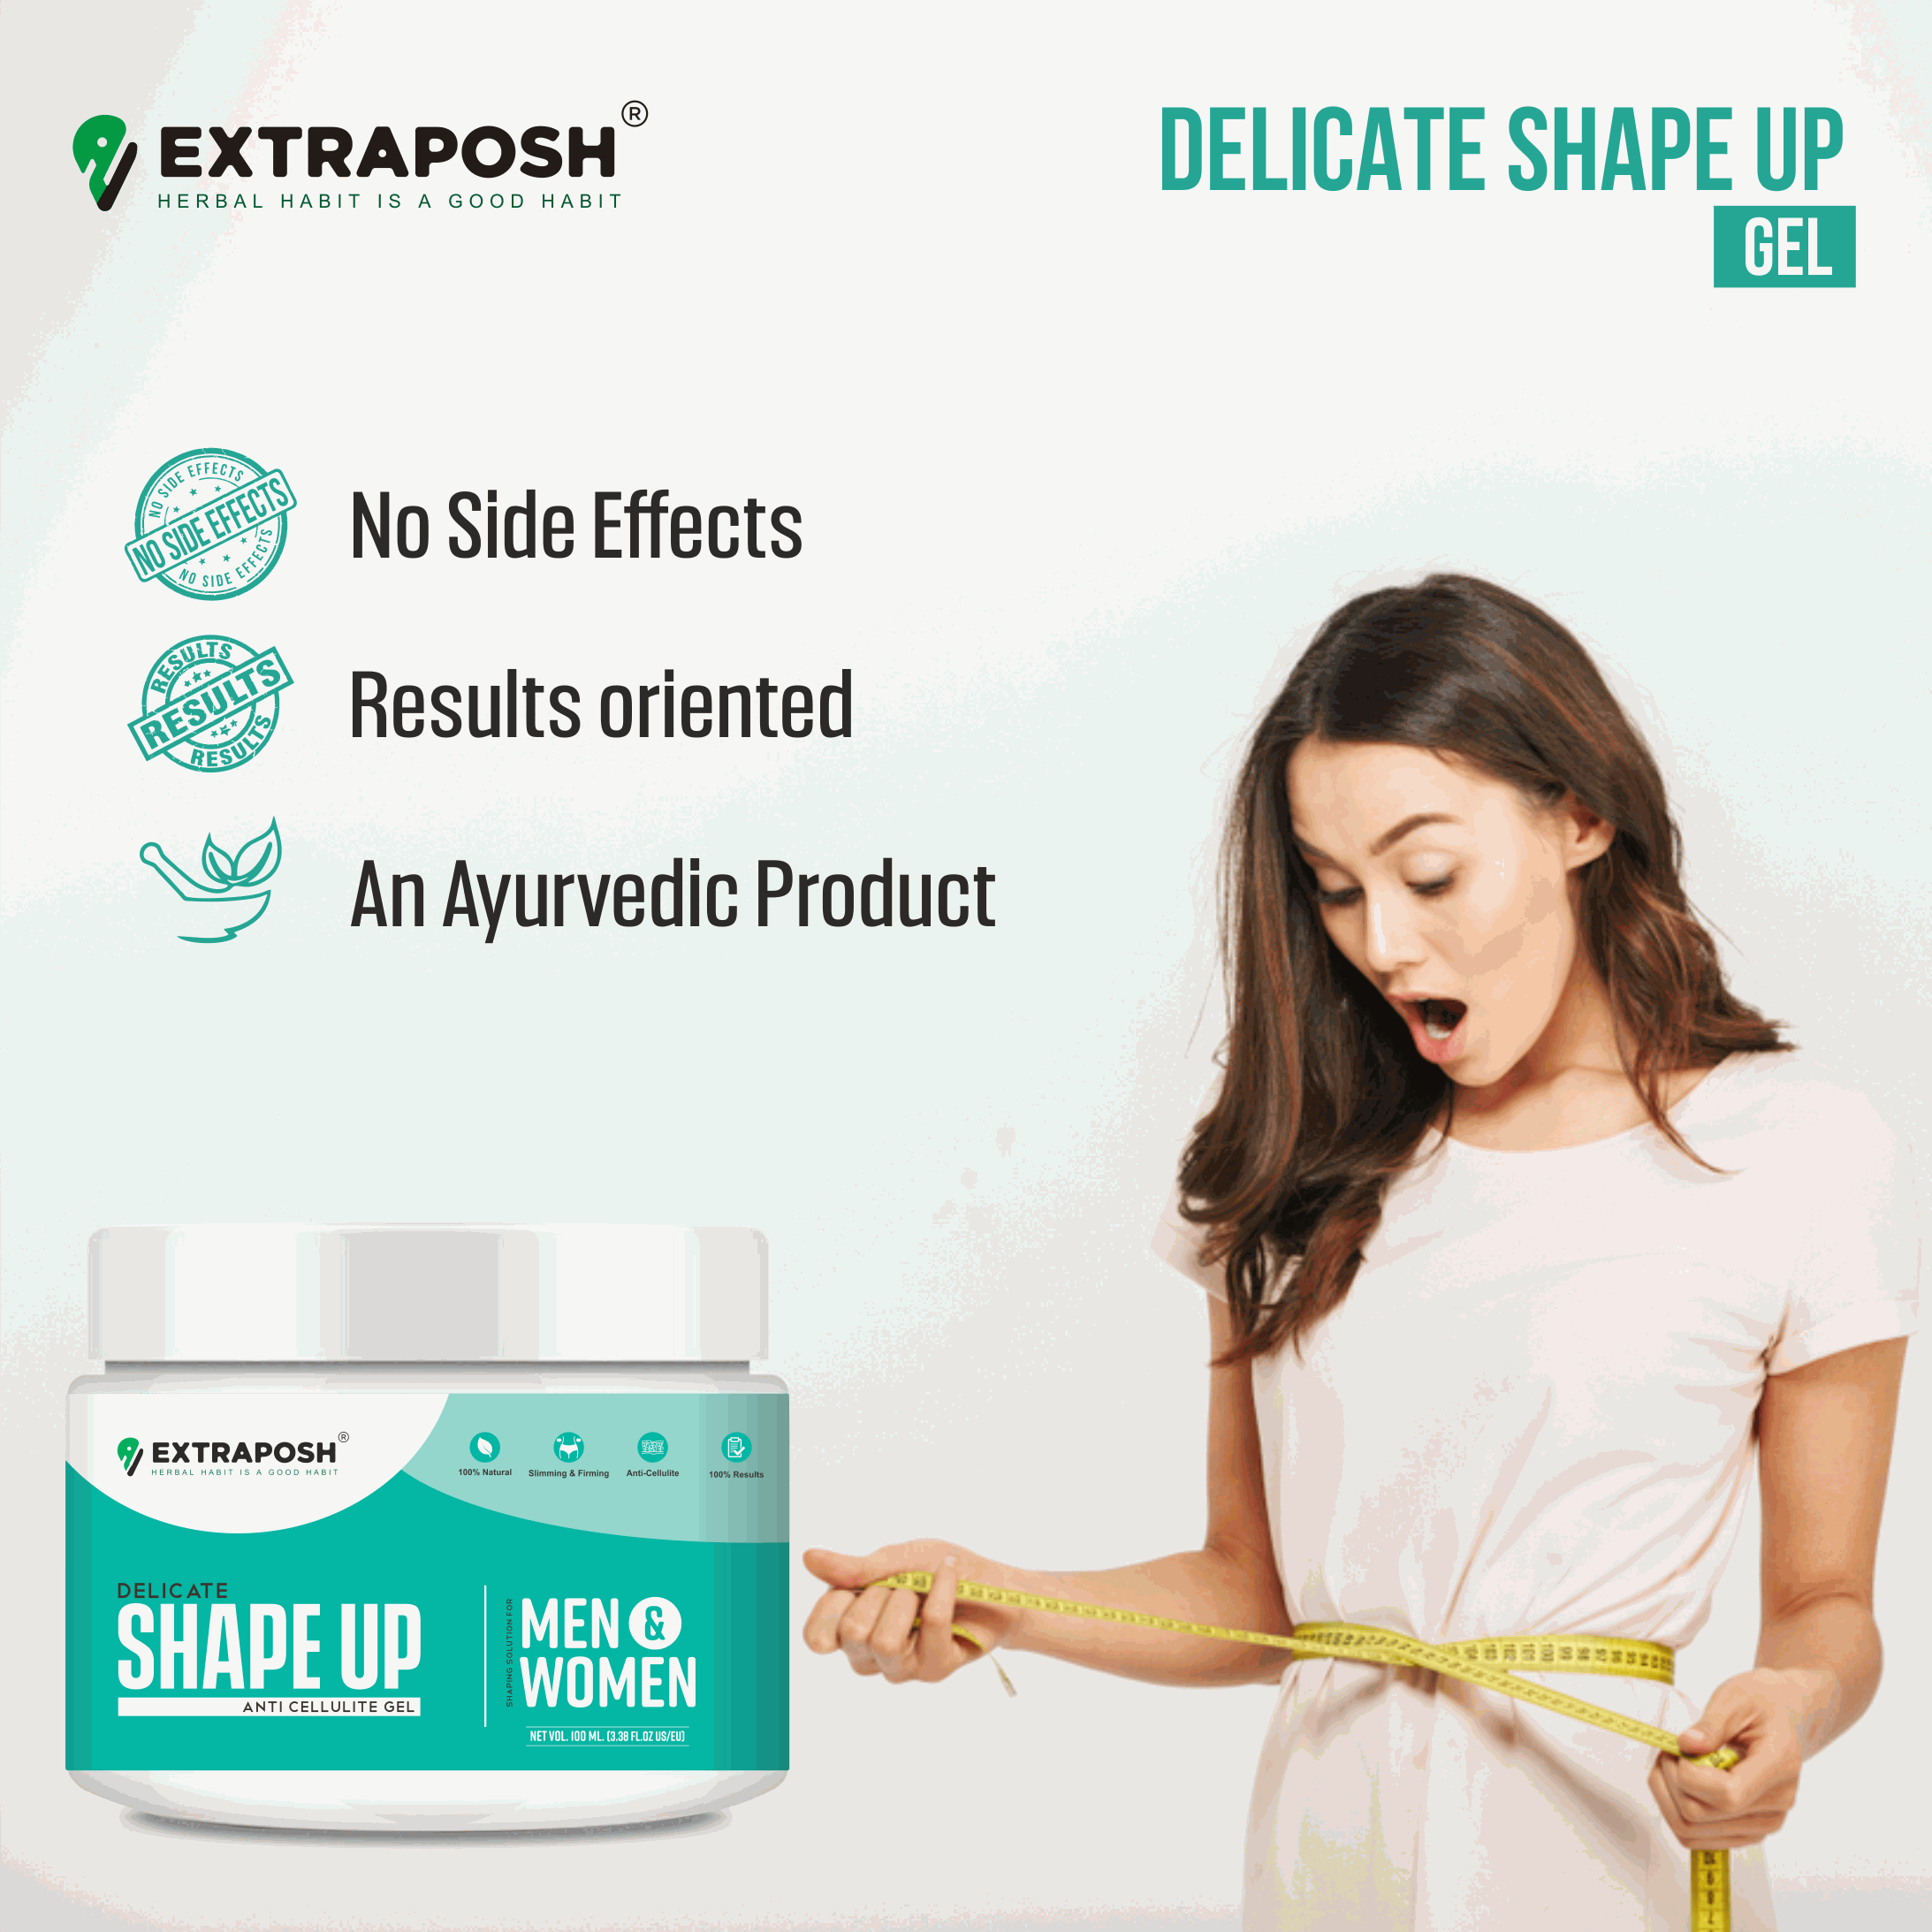 BODY FAT BURNING AND SLIMMING DELICATE SHAPE UP CREAM GEL AN AYURVEDIC PRODUCT RESULT ORIENTED AND NO SIDE EFFECTS